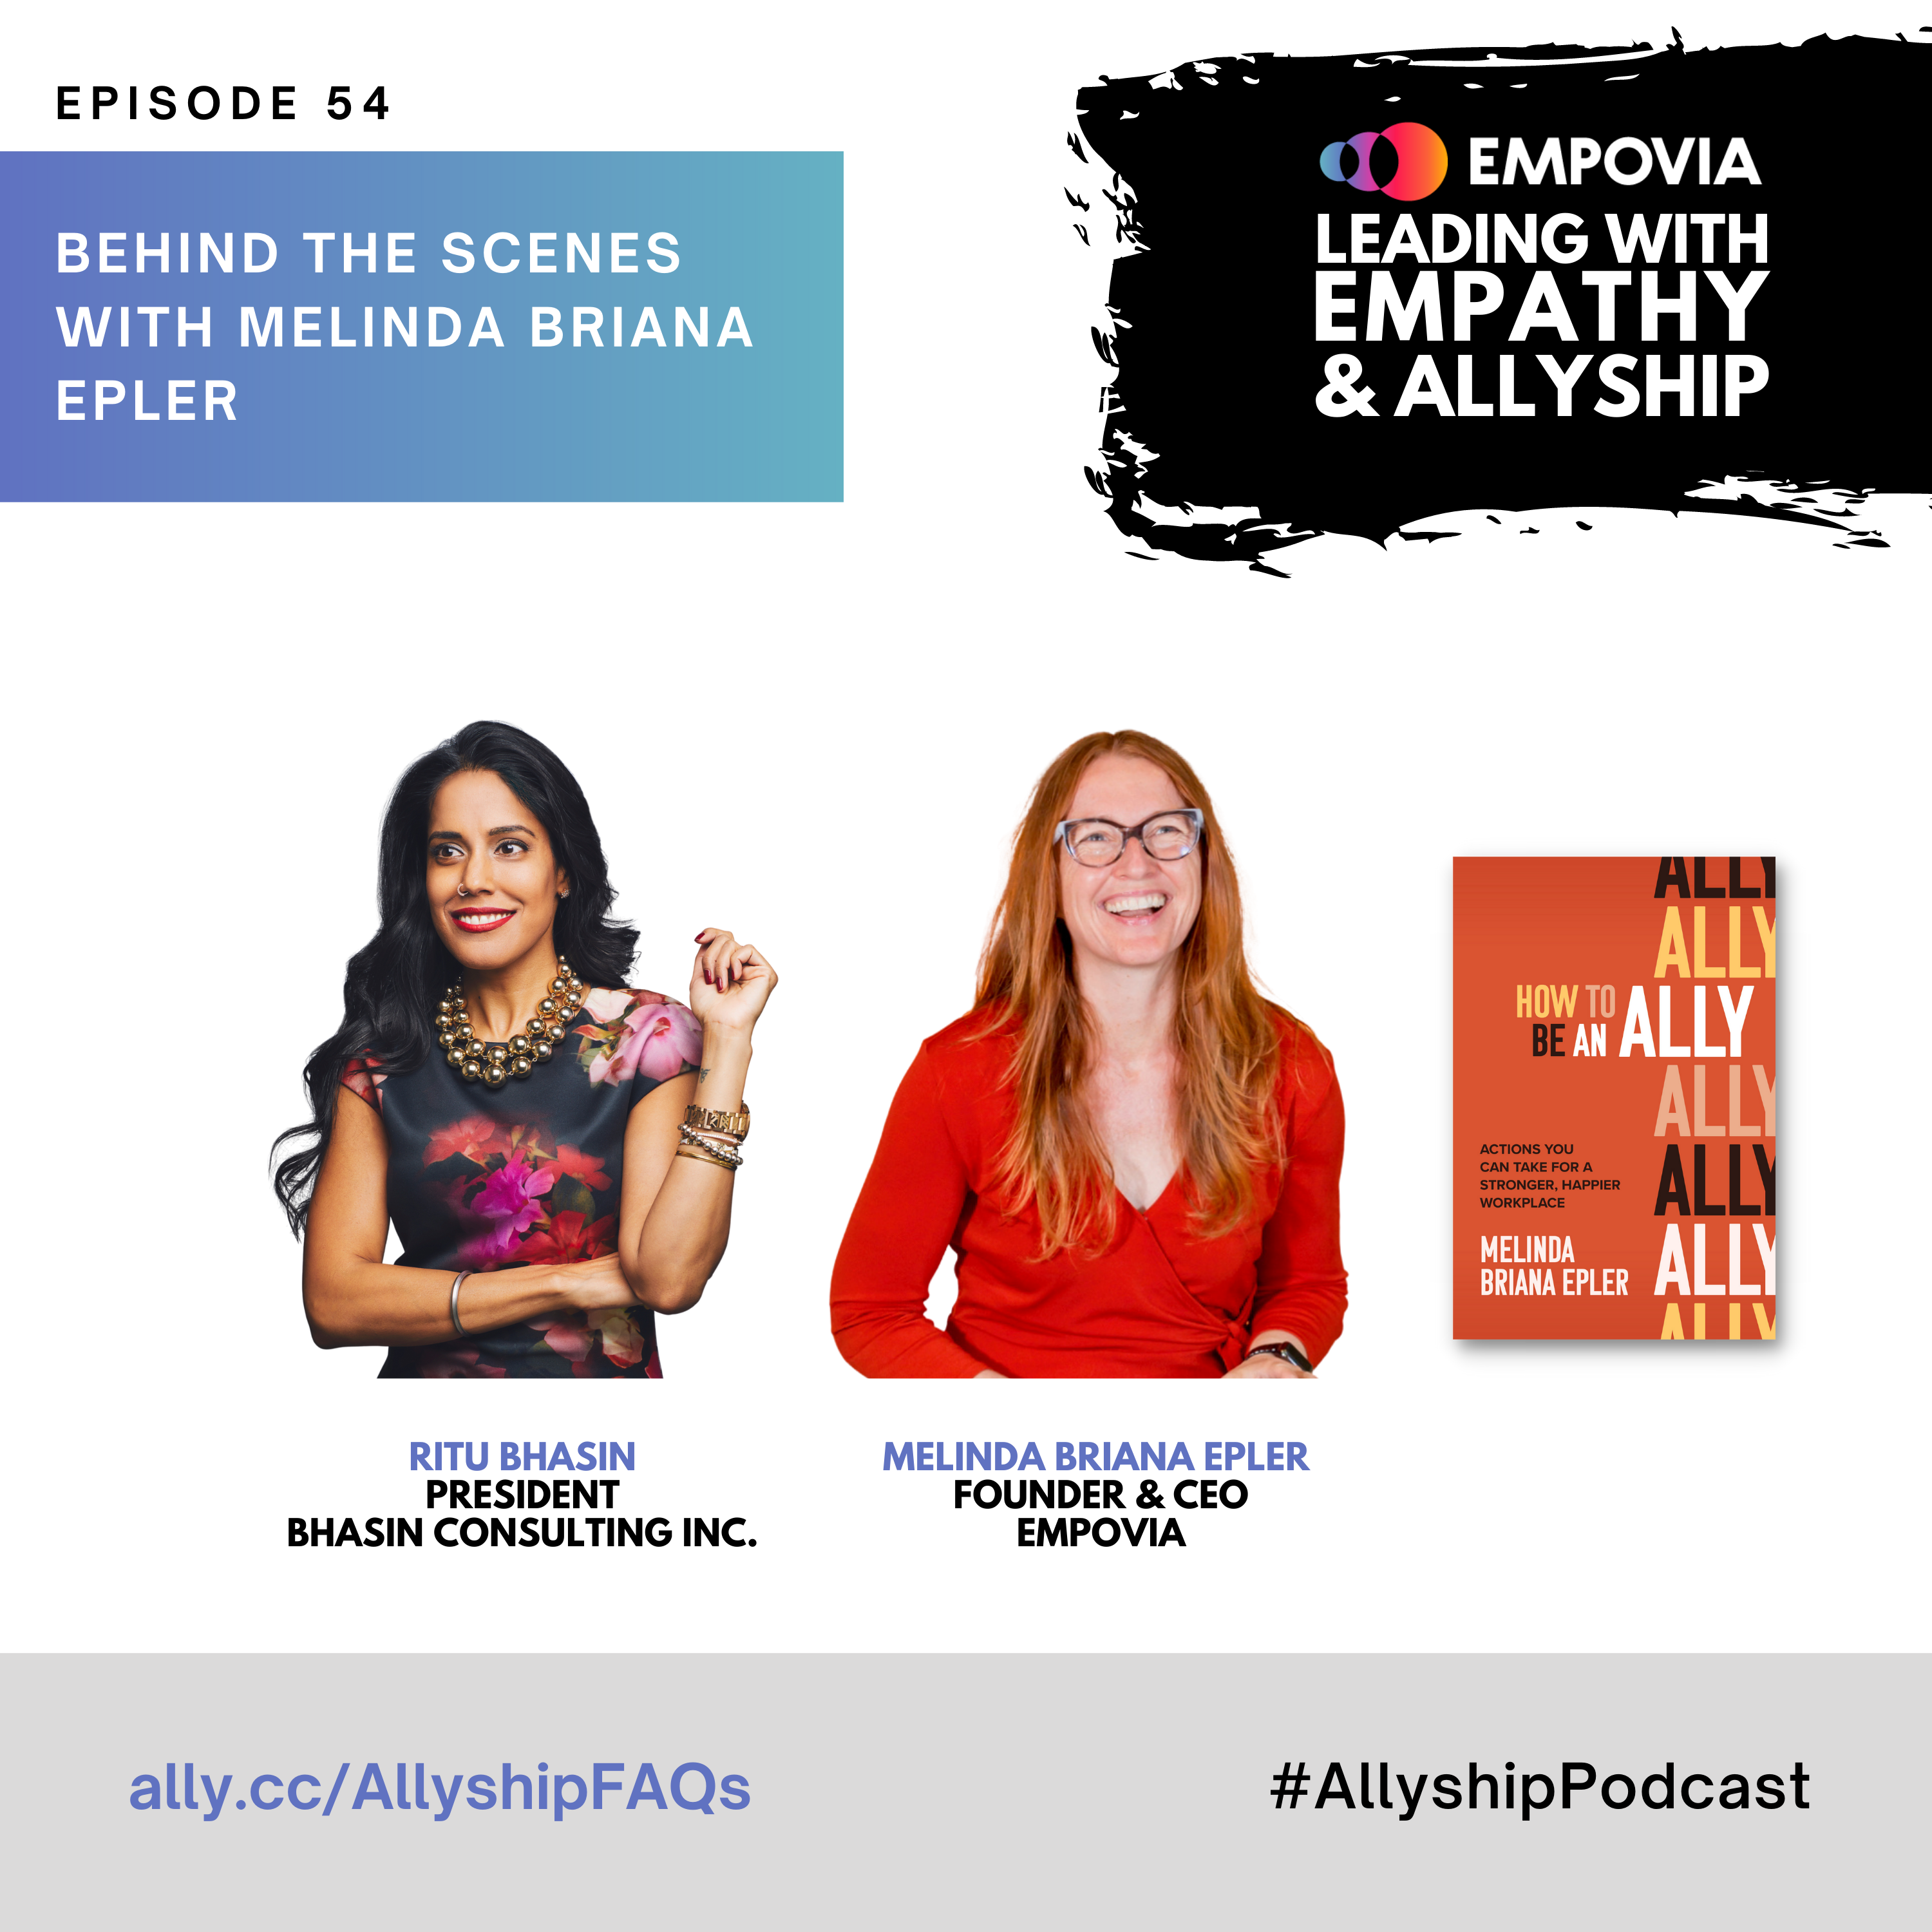 Leading With Empathy & Allyship promo with the Empovia logo and photos of Ritu Bhasin; a Punjabi Indian-Canadian woman with long, wavy black hair and a navy and pink floral dress; host Melinda Briana Epler, a White woman with red hair, glasses, and orange shirt laughing; and an orange book cover for HOW TO BE AN ALLY.